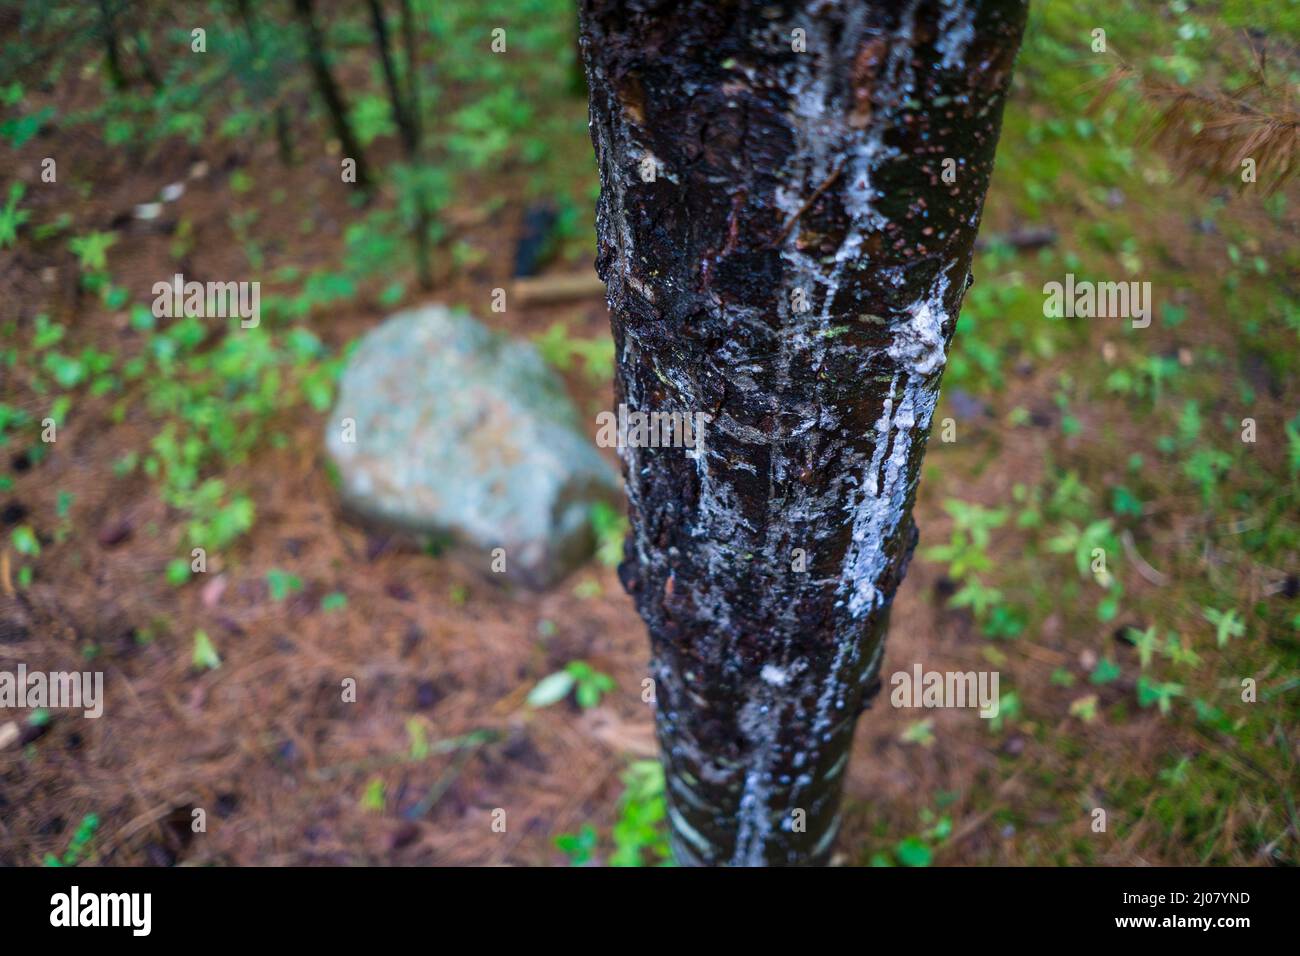 Sap covered tree trunk at camp Stock Photo